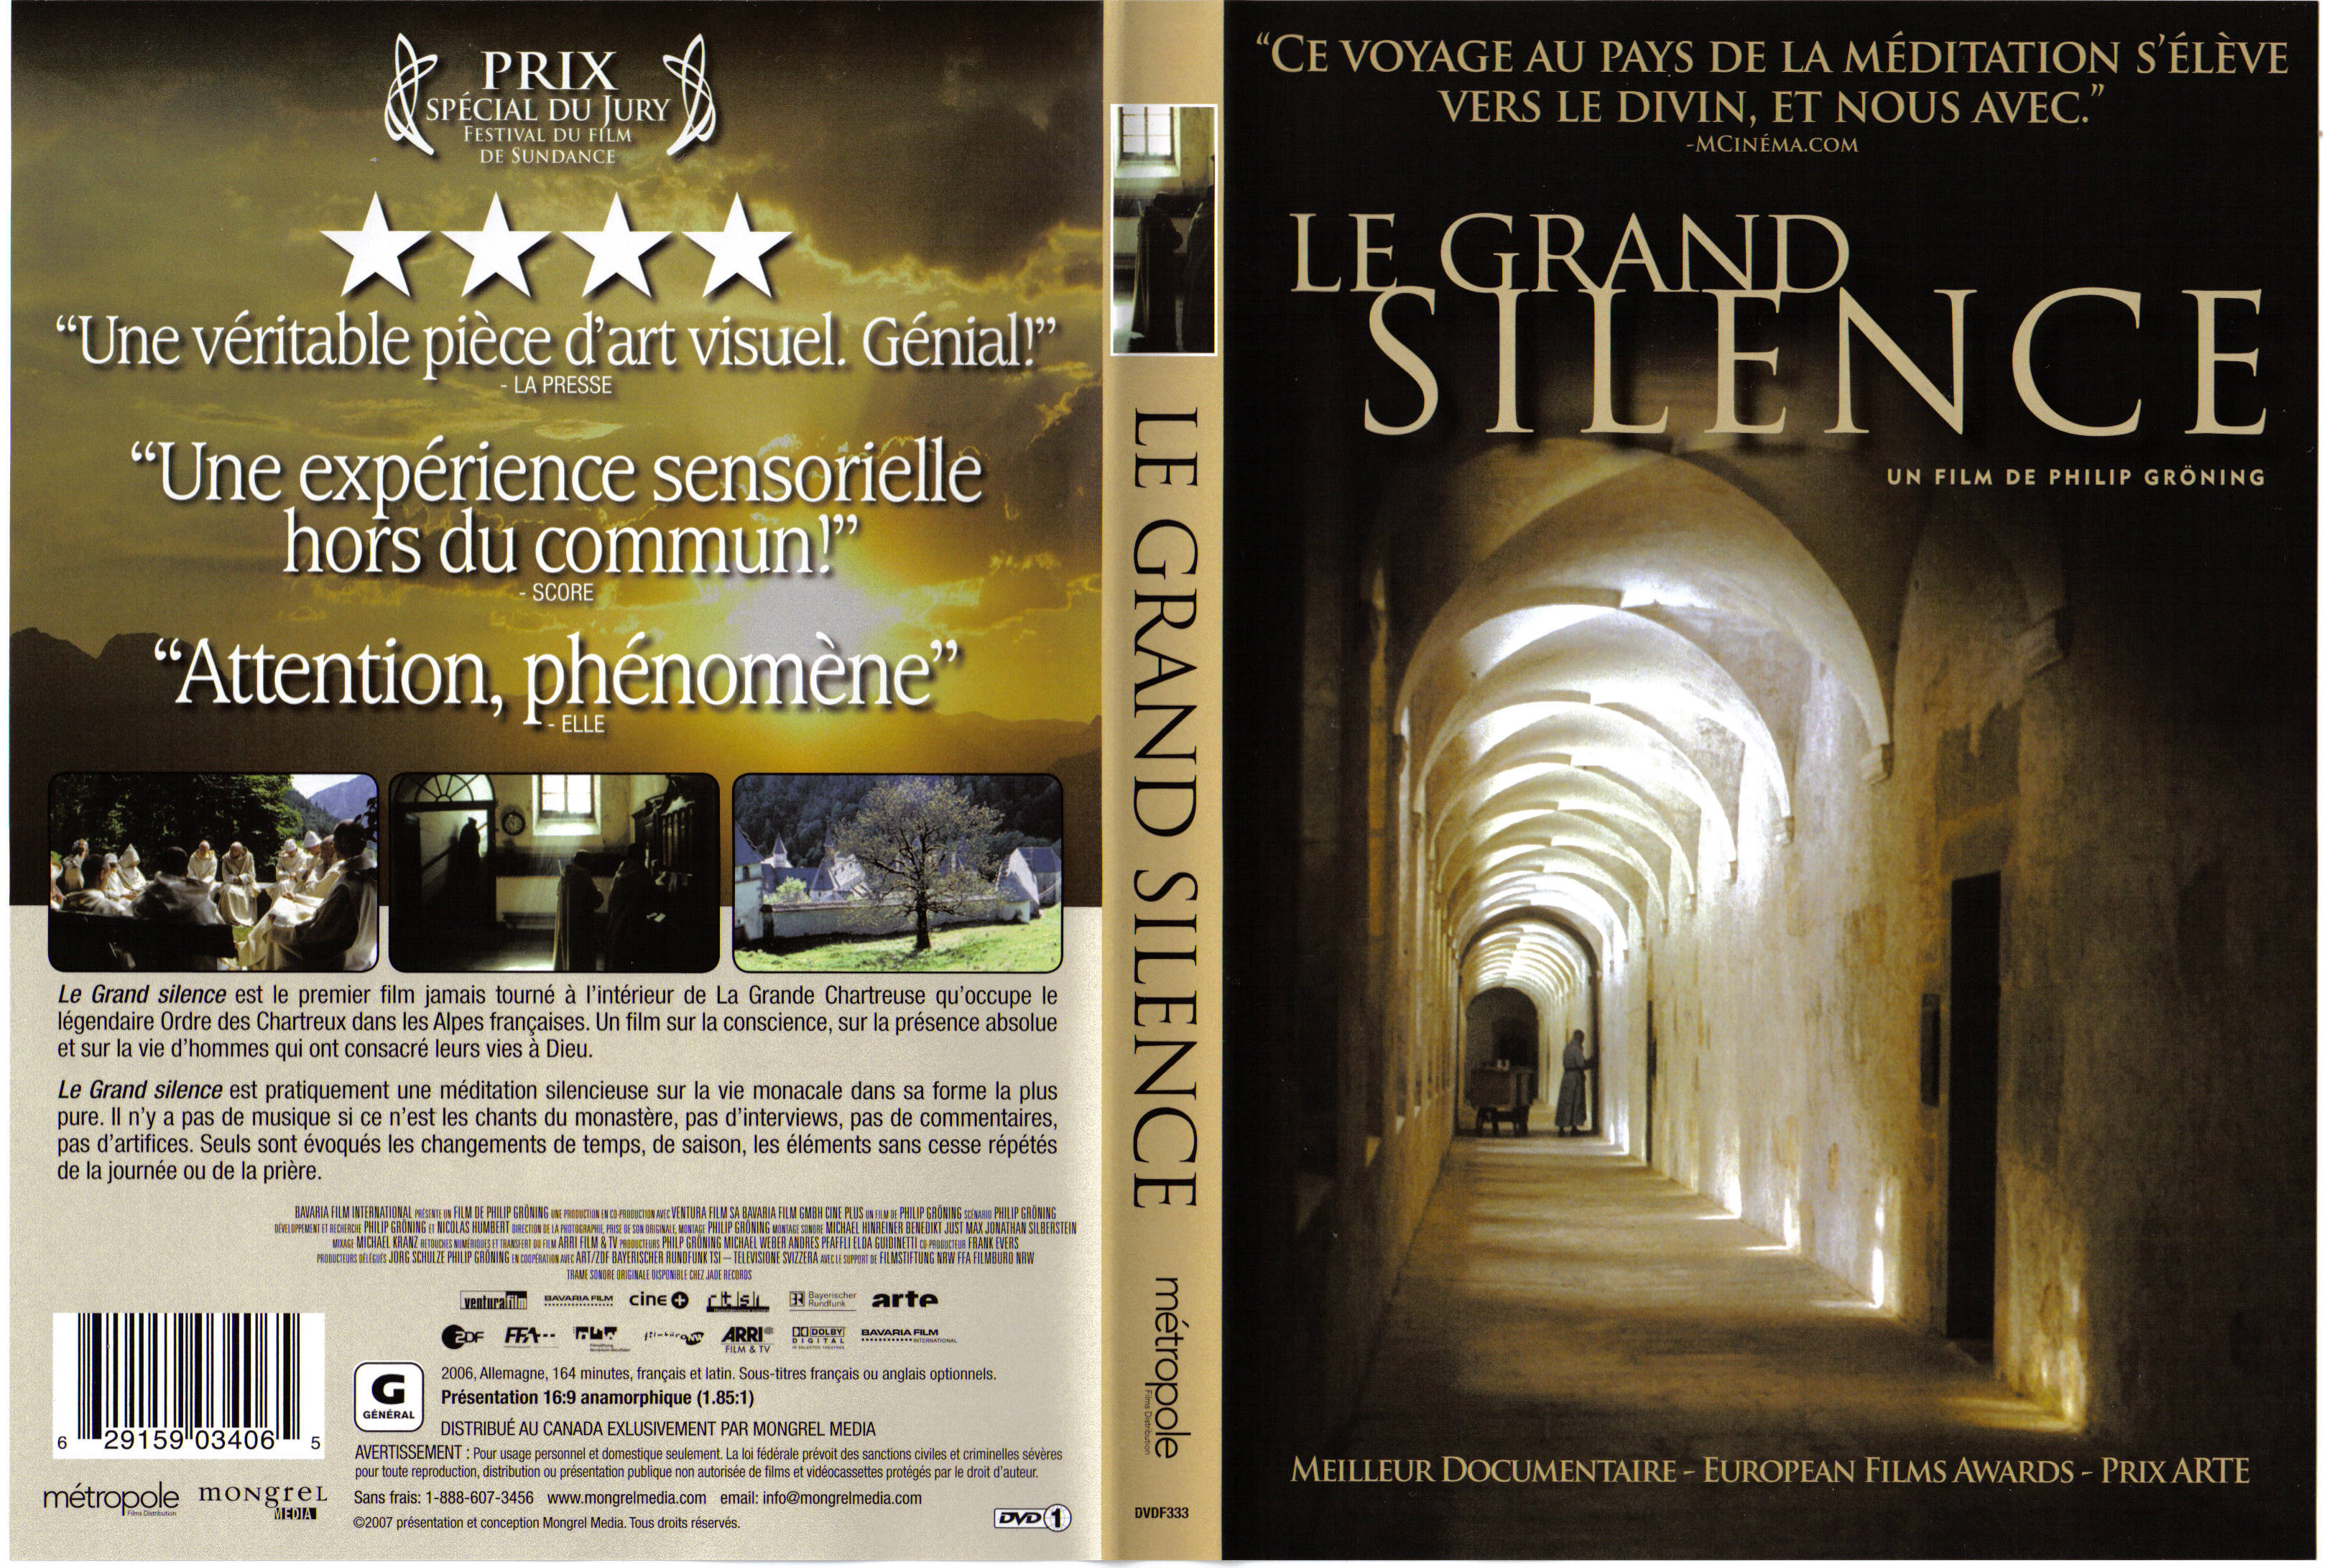 Jaquette DVD Le grand silence (Documentaire)